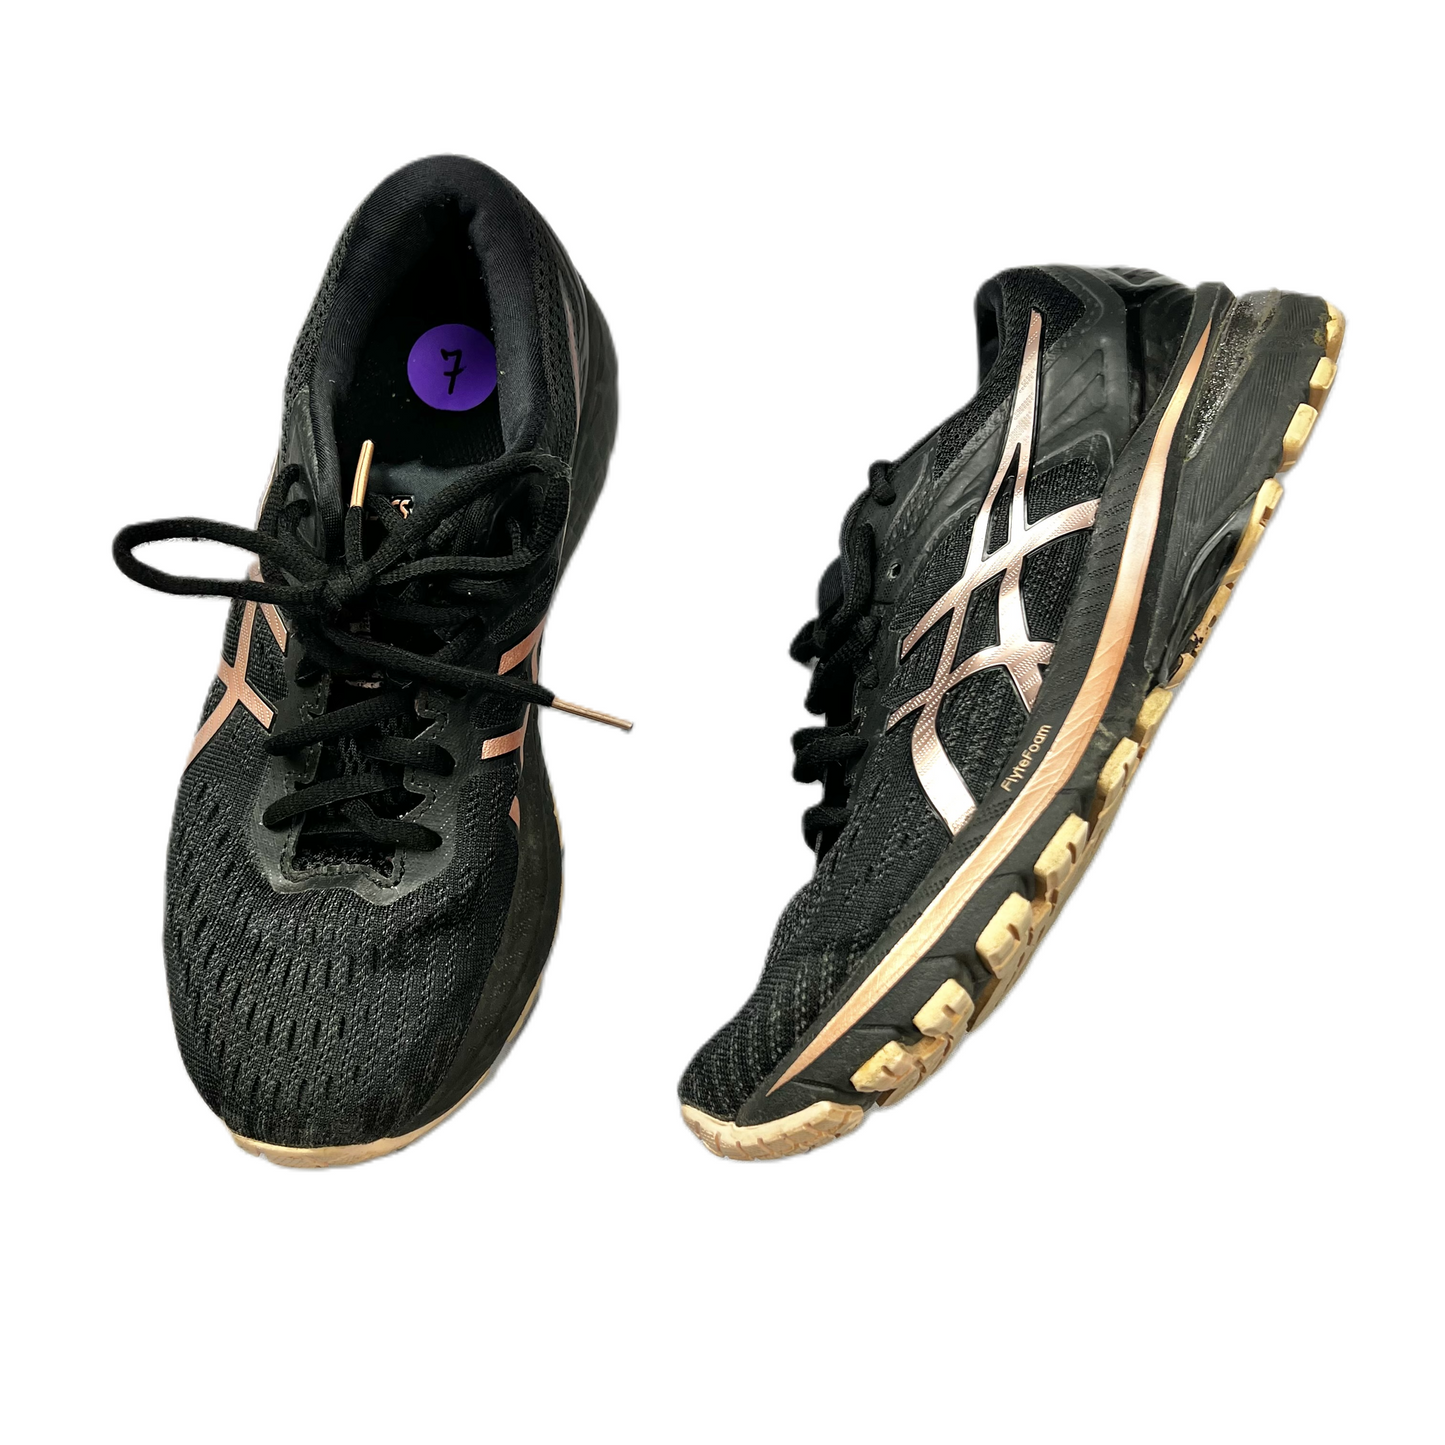 Black & Pink Shoes Athletic By Asics, Size: 7